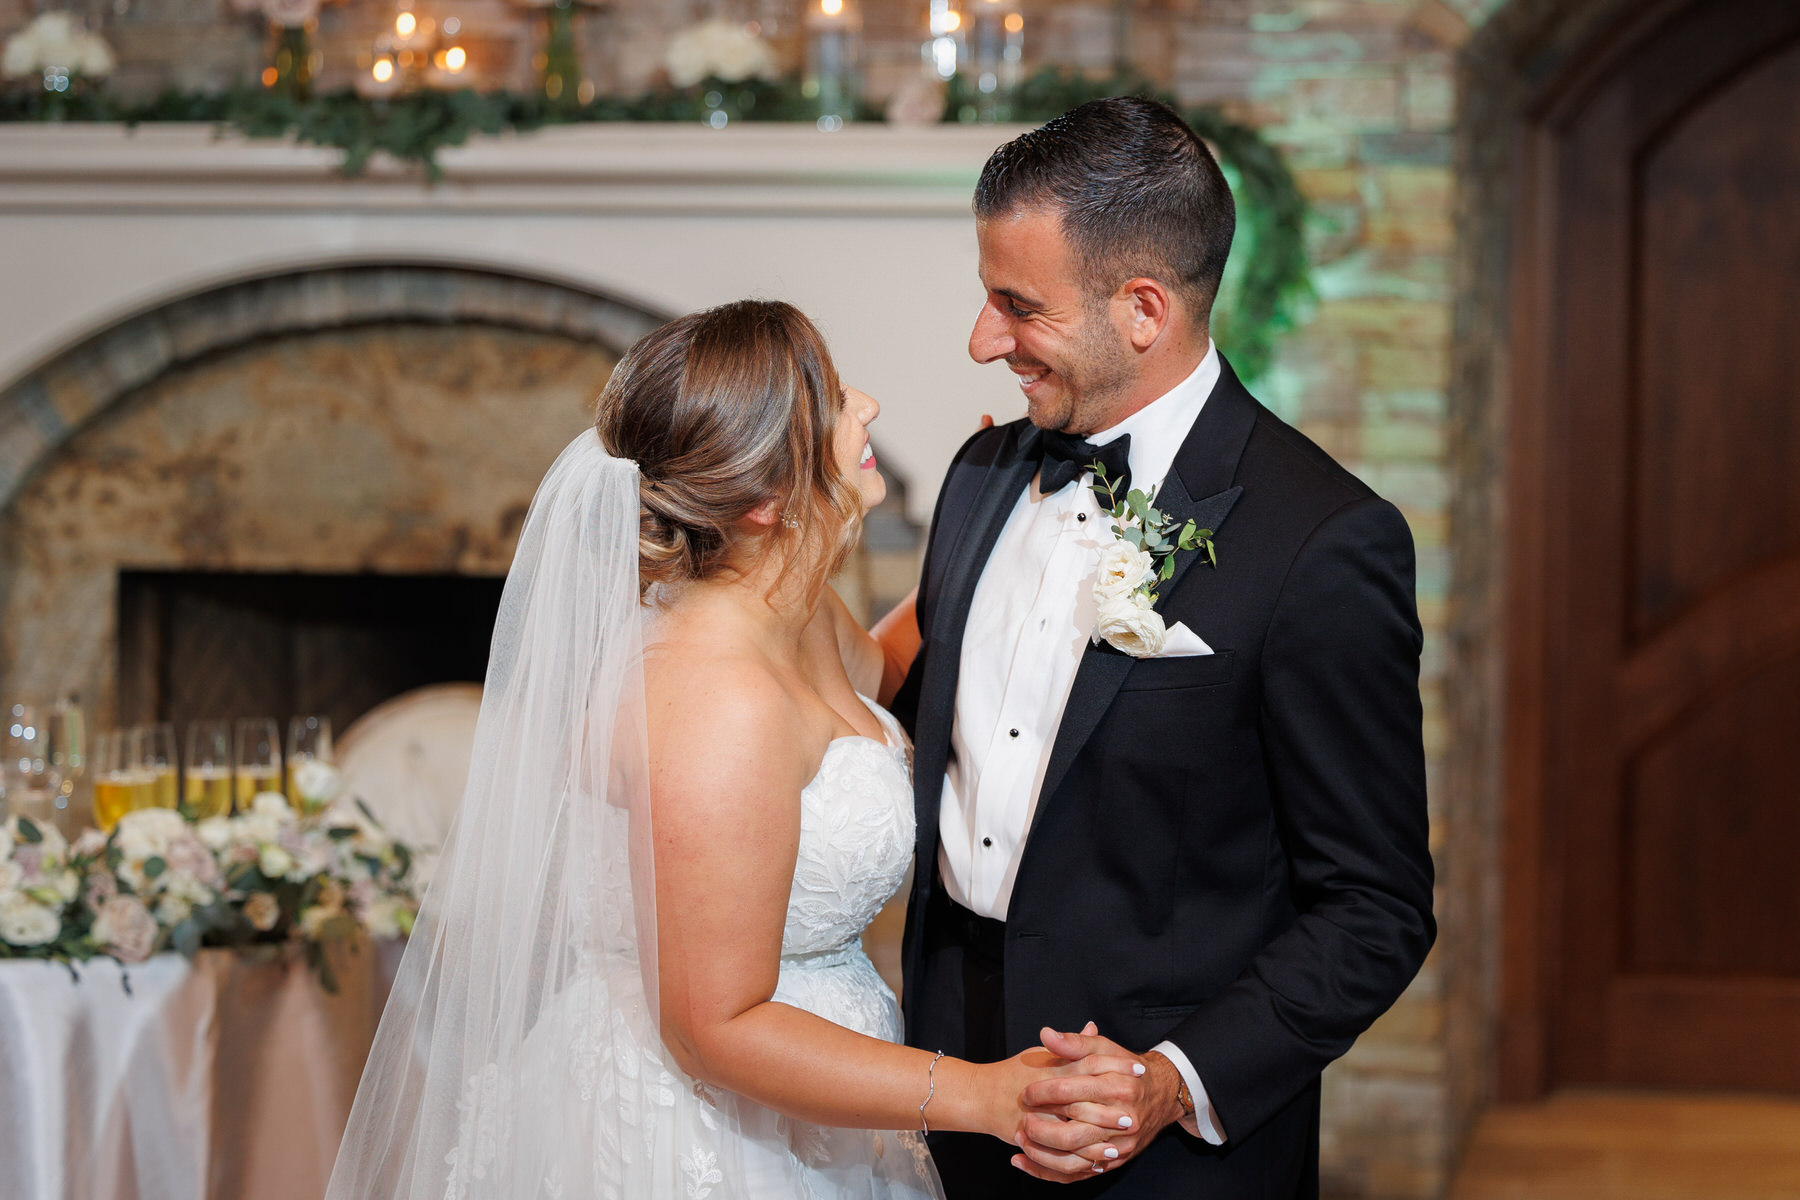 A bride and groom smiling at each other inside a room, with a decorated fireplace and floral arrangements in the background, perfectly arranged according to their wedding timeline.